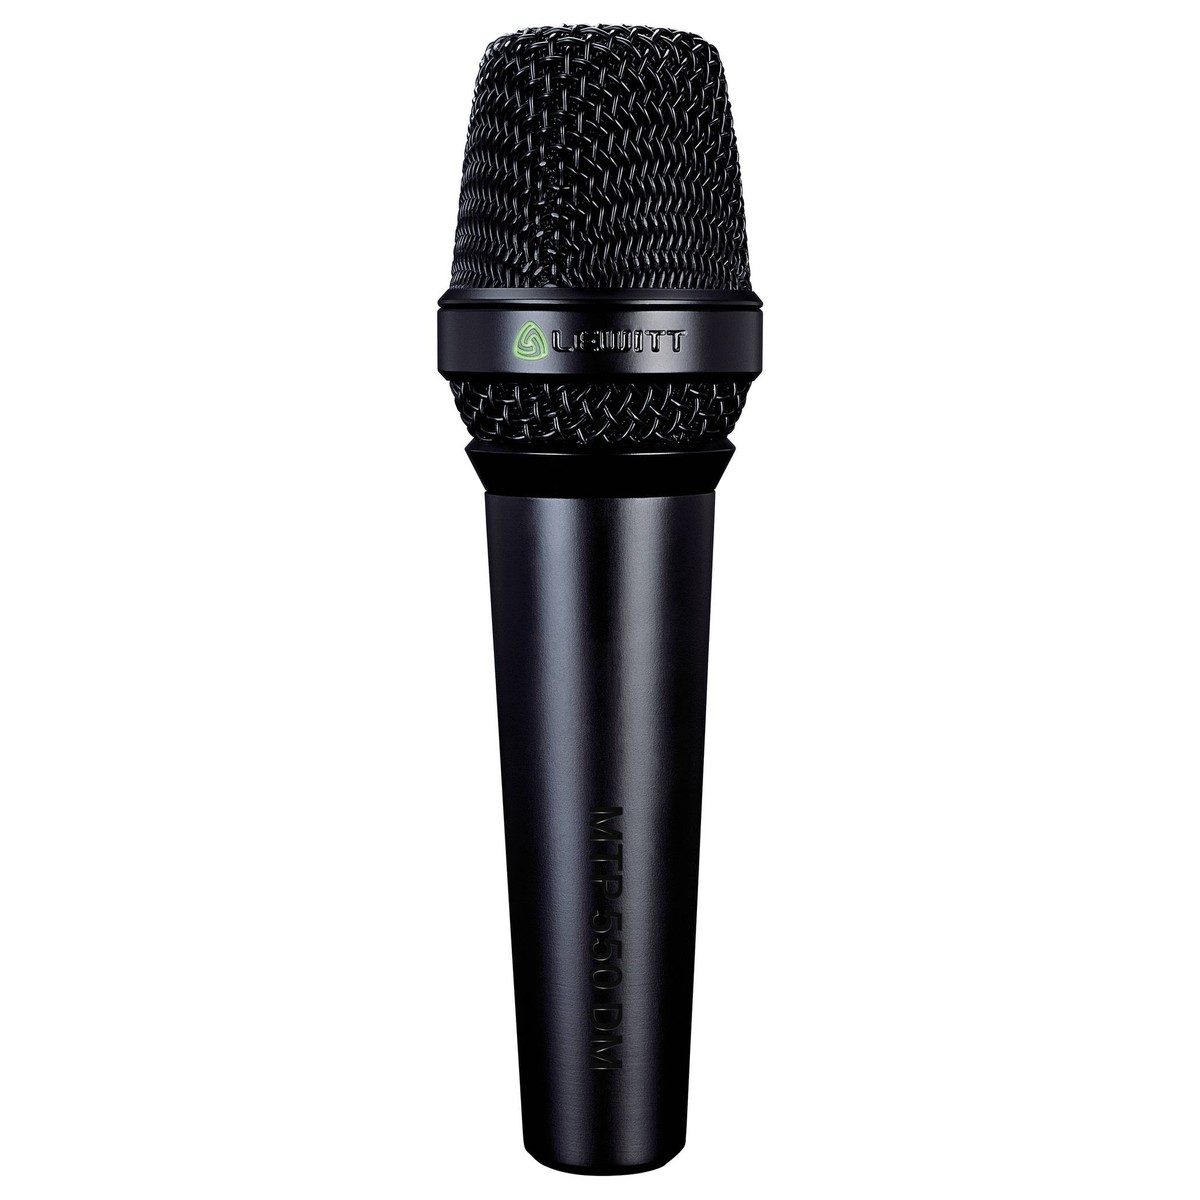 An image of Lewitt MTP 550 DM Handheld Dynamic Vocal Microphone